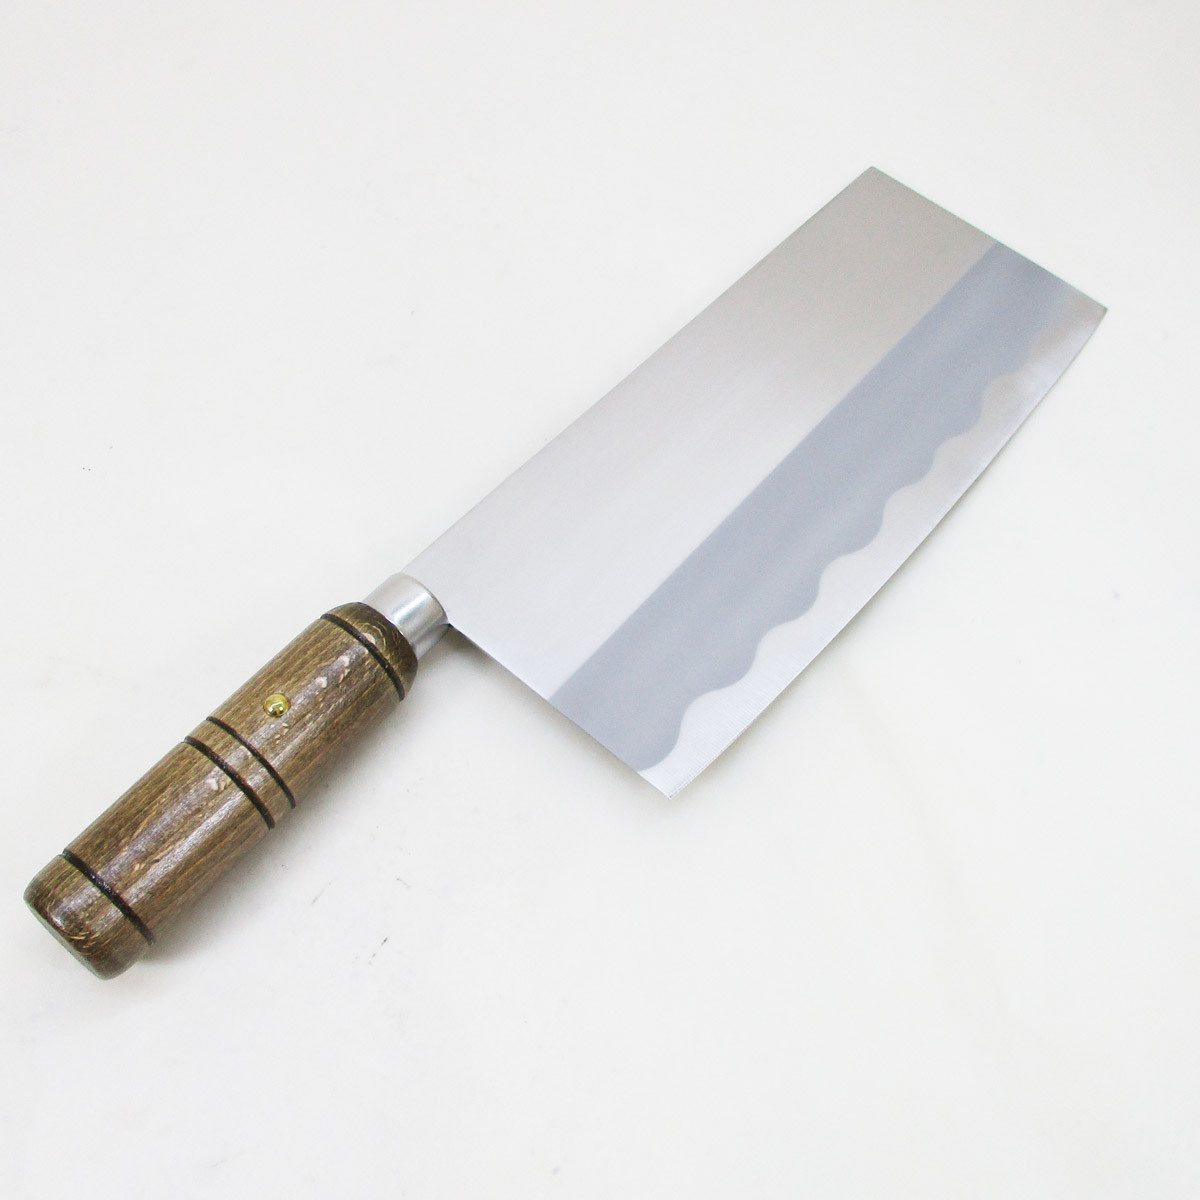  including in a package possibility Chinese kitchen knife made in Japan classical . sword . guard on sword warehouse work tree pattern 8 -inch ( blade migration 200mm)